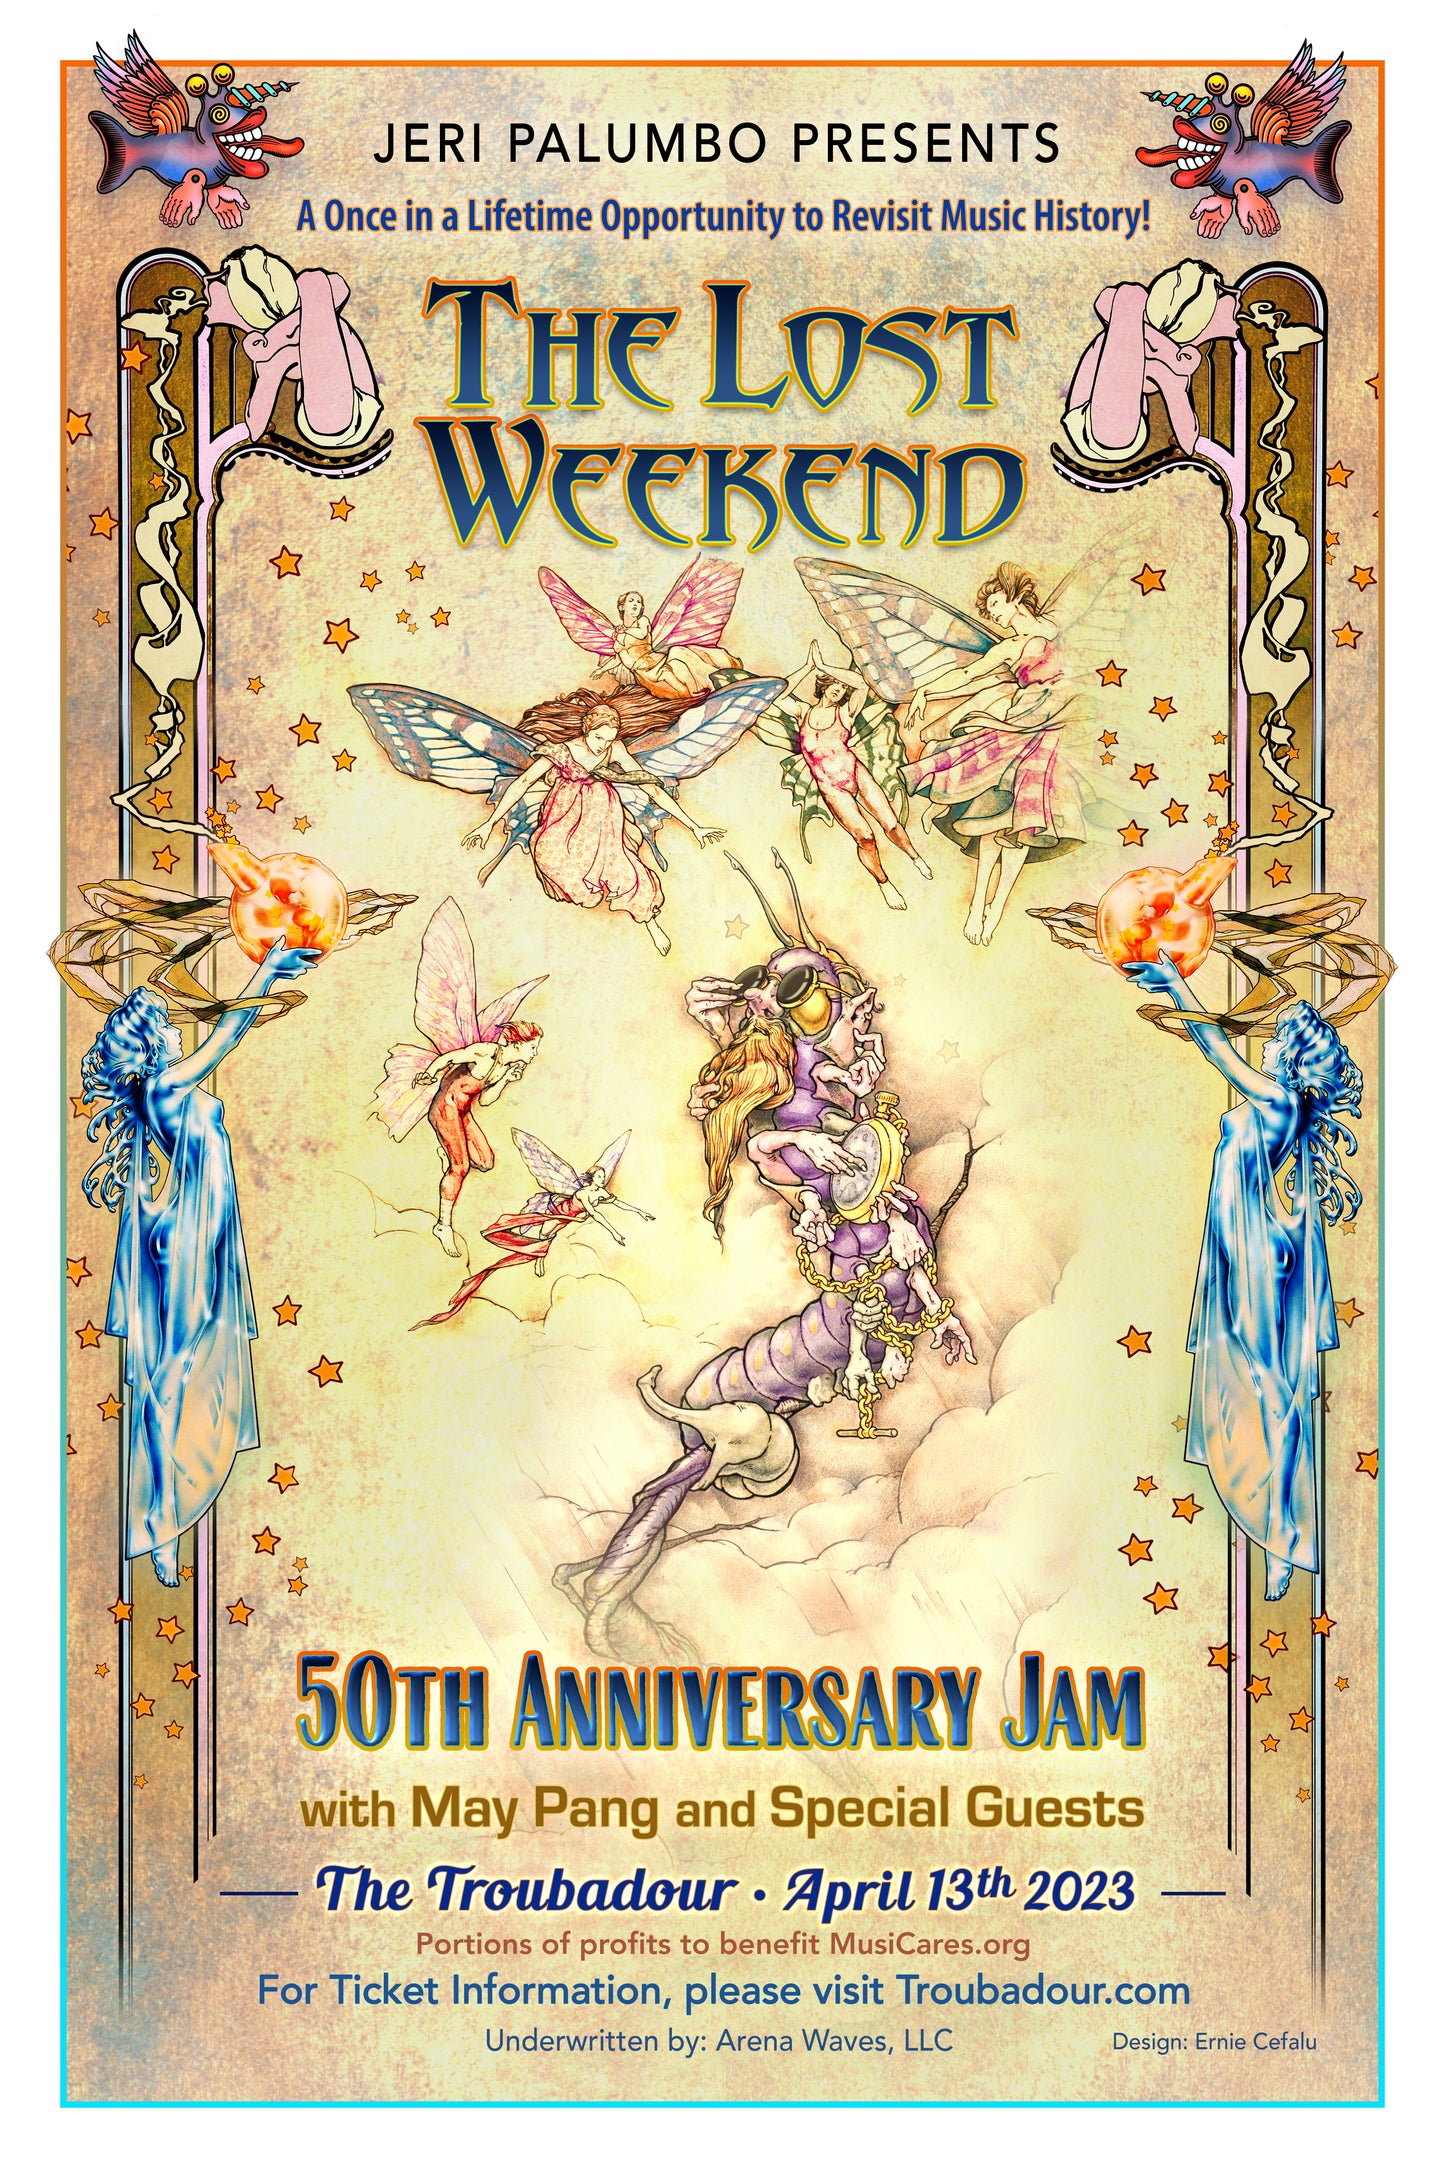 Item #3 - SIGNED AND NUMBERED by both MAY PANG as well as ERNIE CEFALU, artist and poster creator (SMALL LOT). TLW 50th Anniversary Jam at The Troubadour Commemorative Collectible Poster